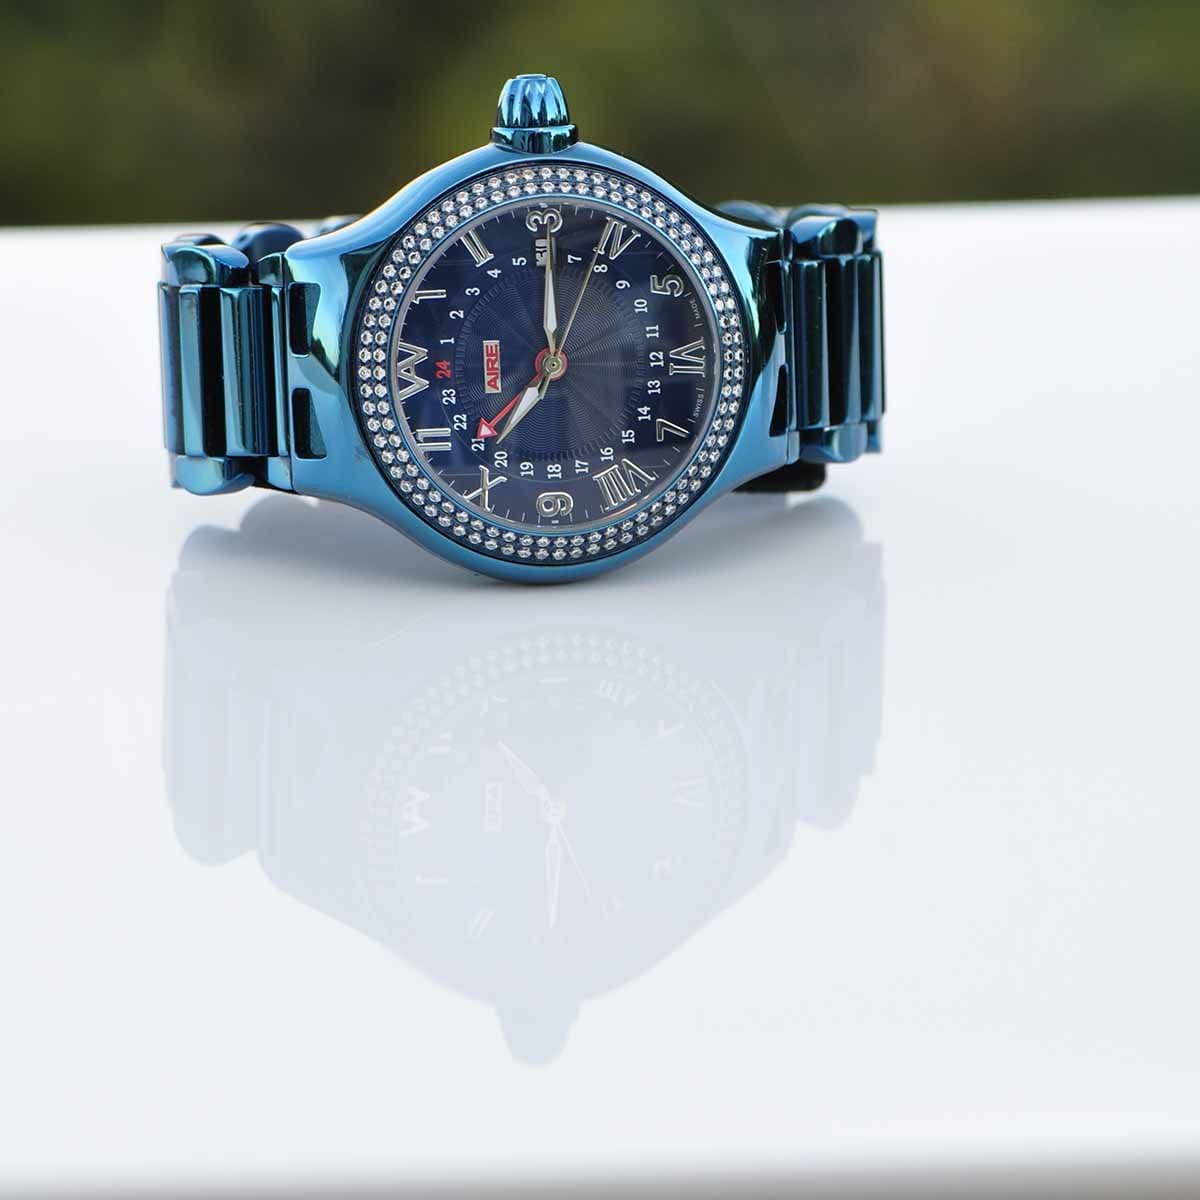 CHRIS AIRE WATCH - PARLAY GMT BLUE  LAGOON - Chris Aire Fine Jewelry & Timepieces